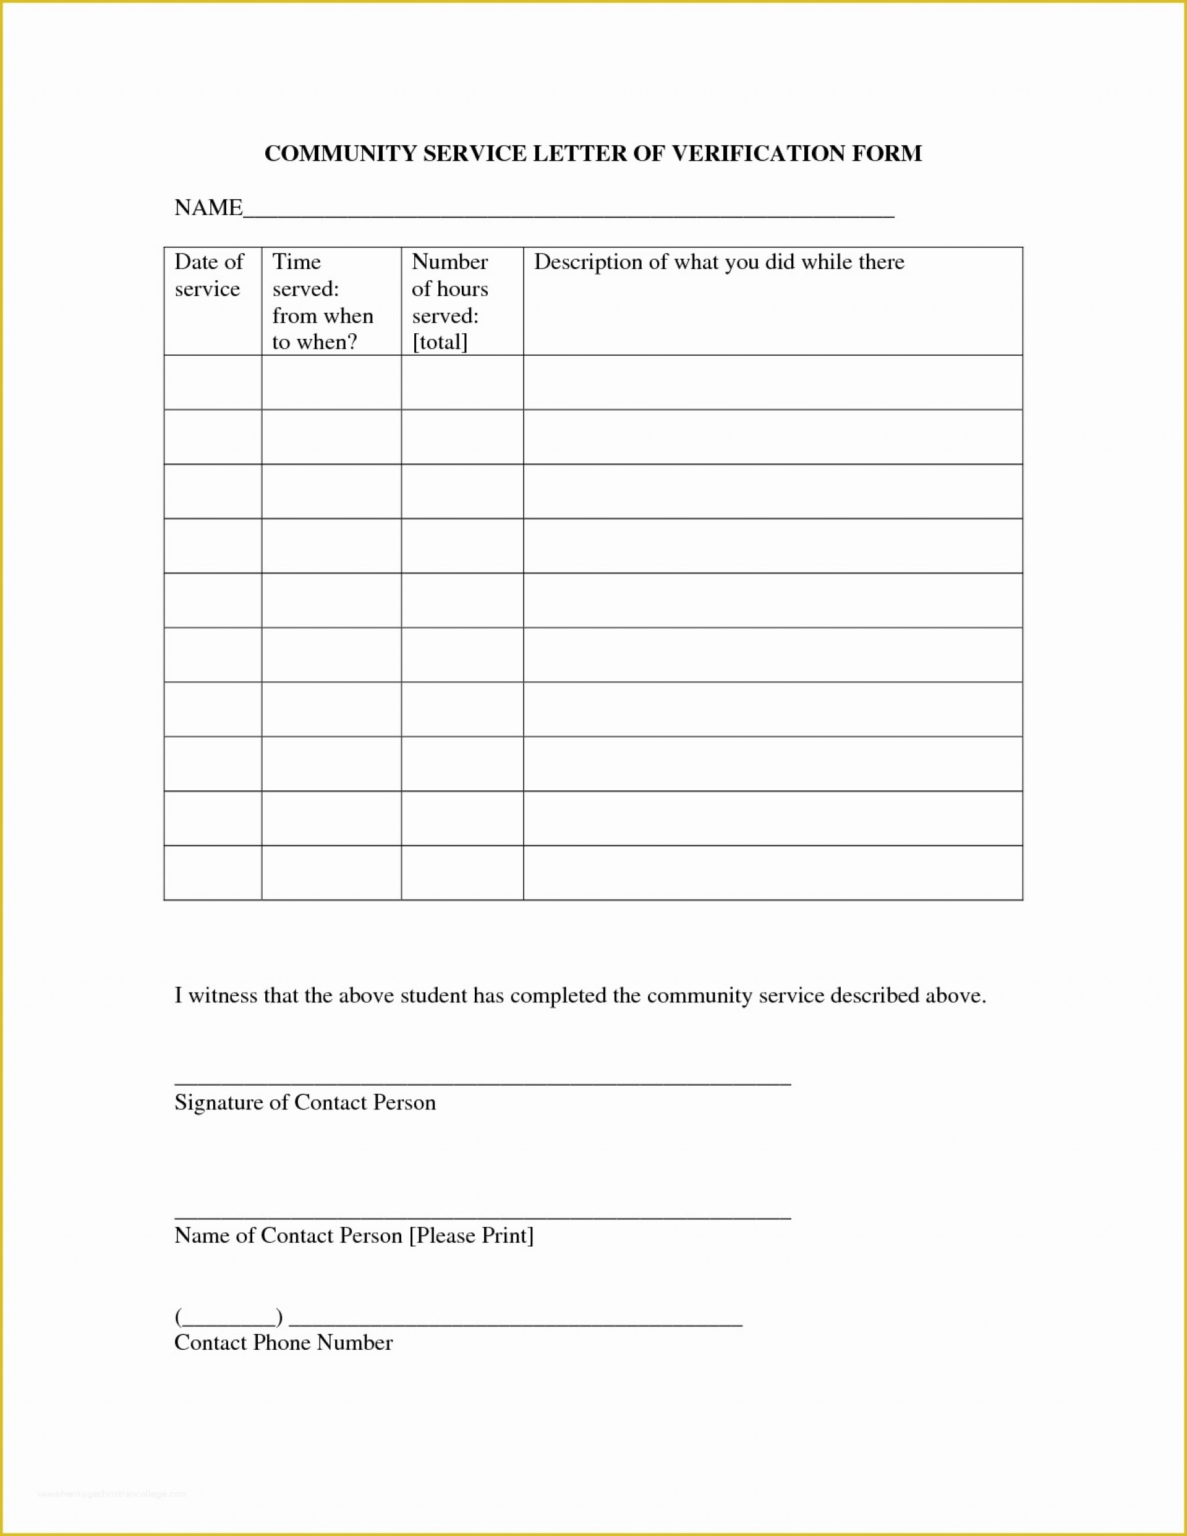 024-volunteer-hours-form-template-application-unbelievable-pertaining-to-community-service